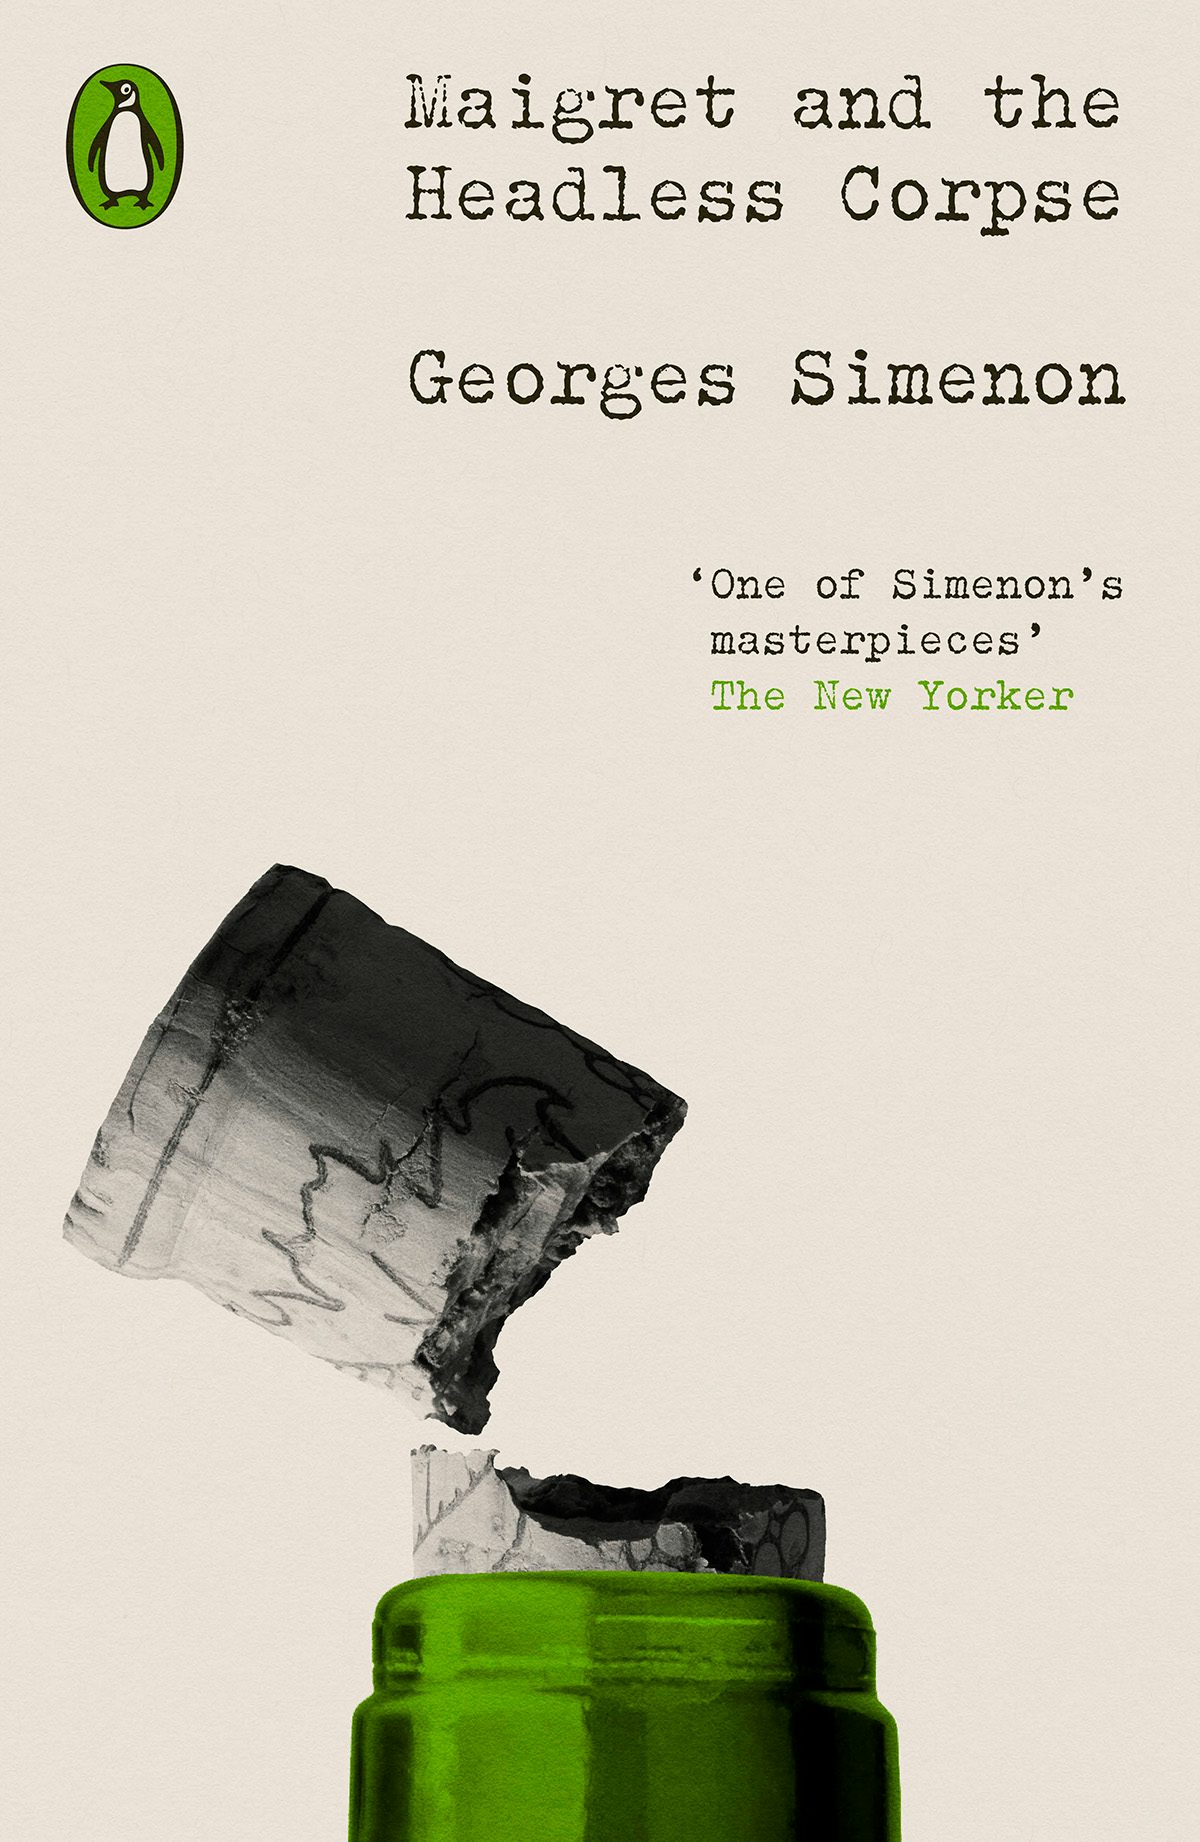 Image shows the cover of Maigret and the Headless Corpse from Penguin Modern Classics Crime and Espionage series, showing an illustration of a cork stapped off the top of a green bottle